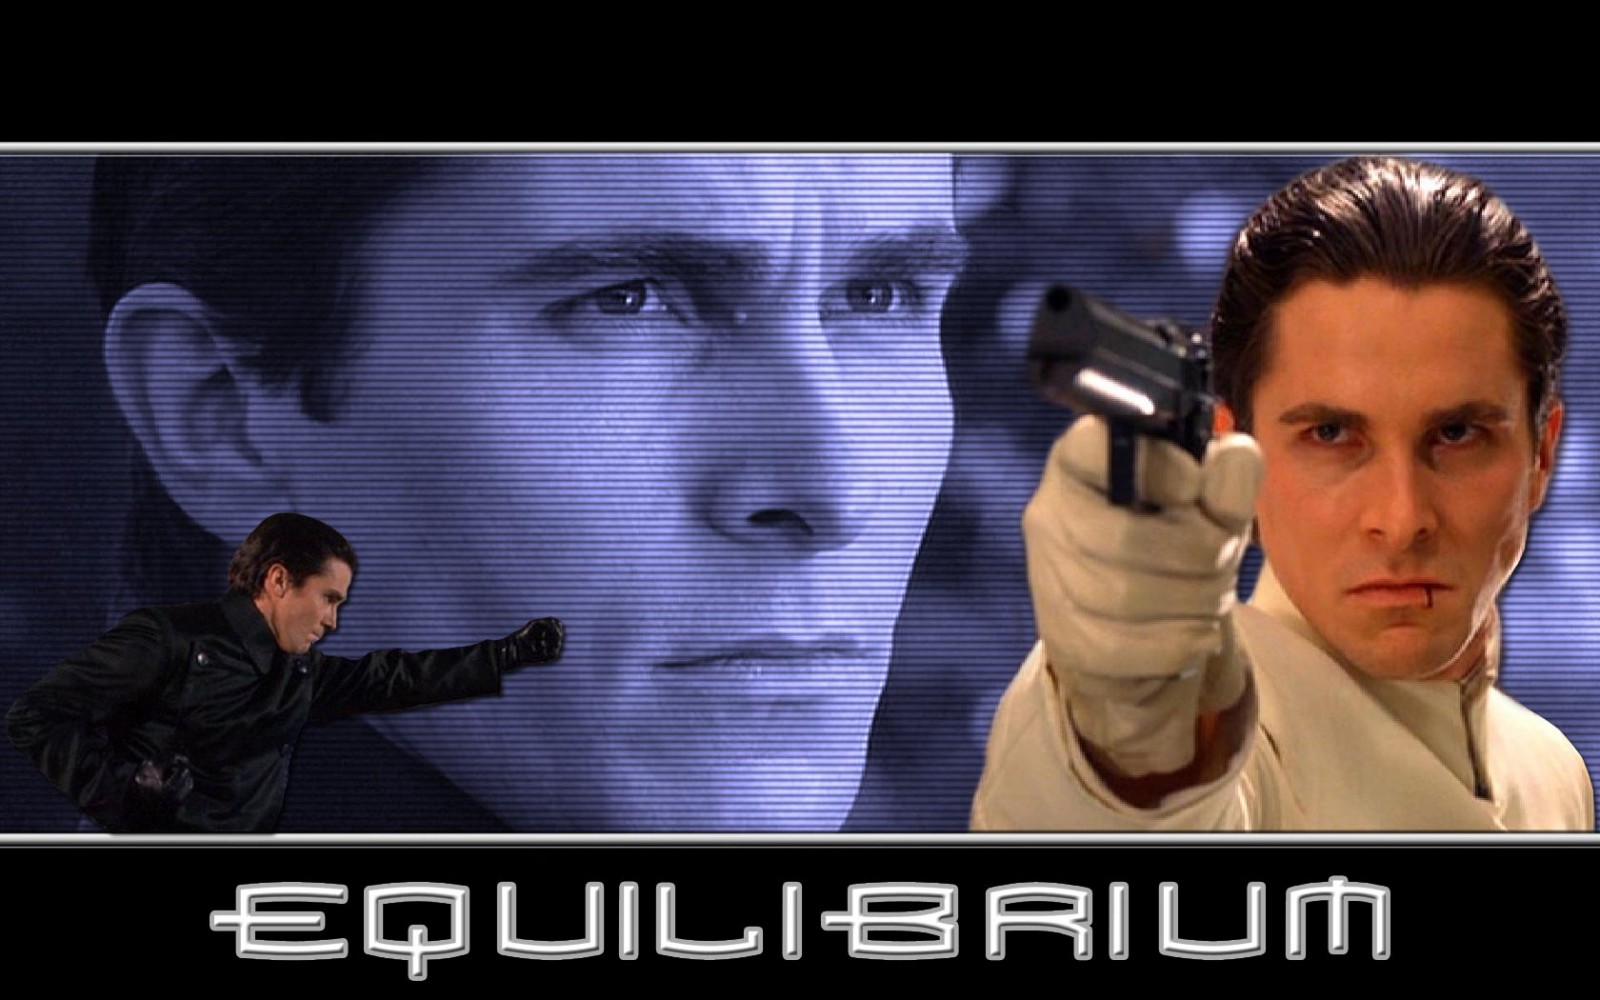 Download High quality Equilibrium wallpaper / Movies / 1600x1000